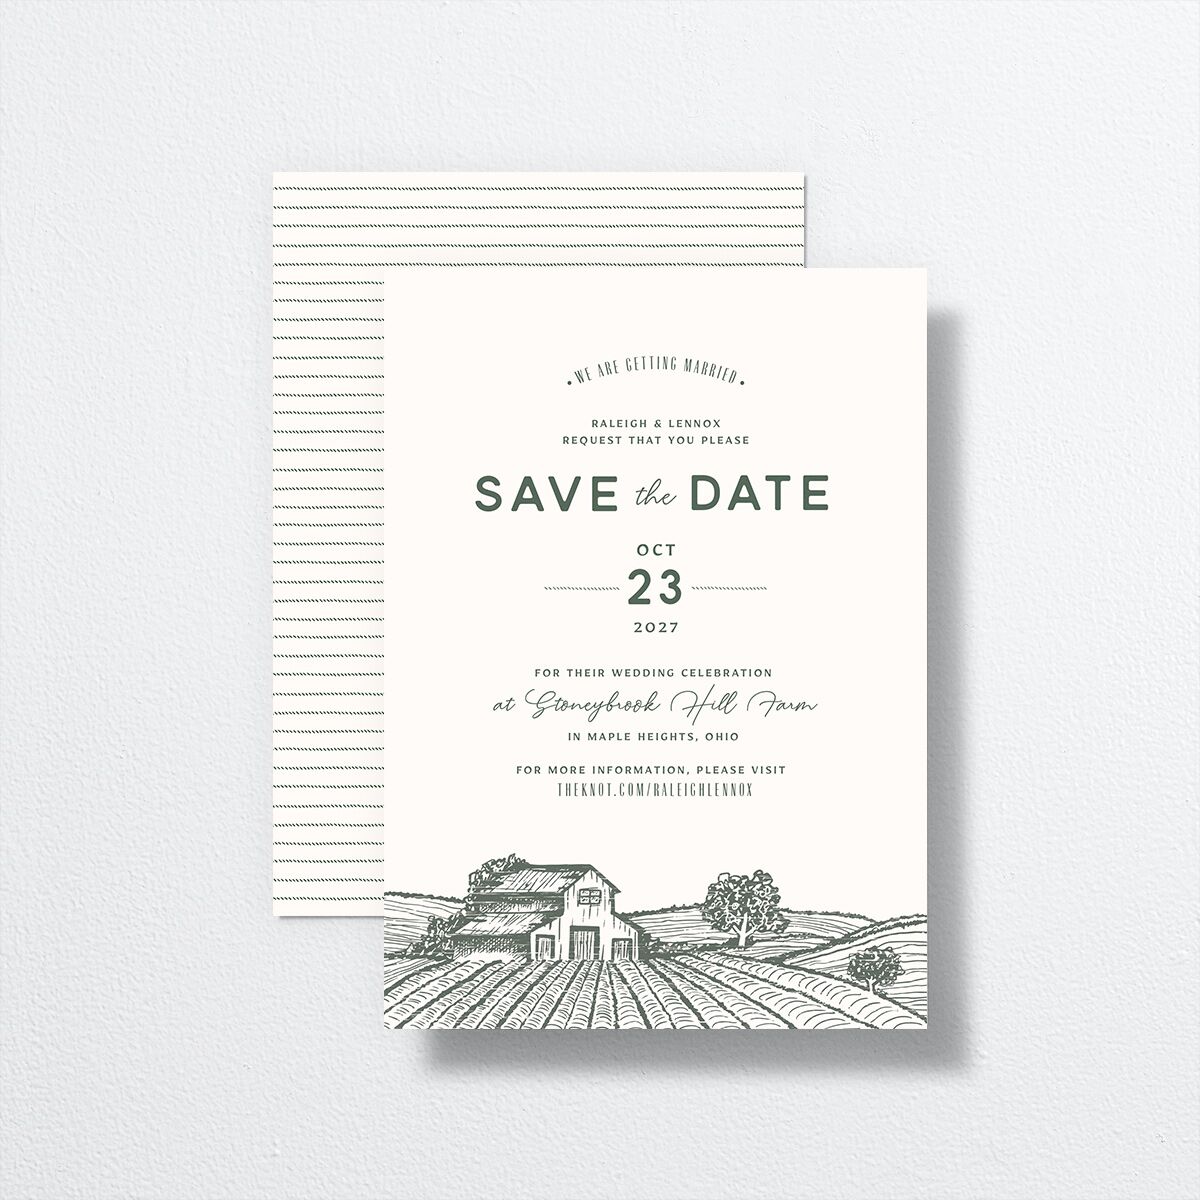 Country Farm Save The Date Cards front-and-back in green